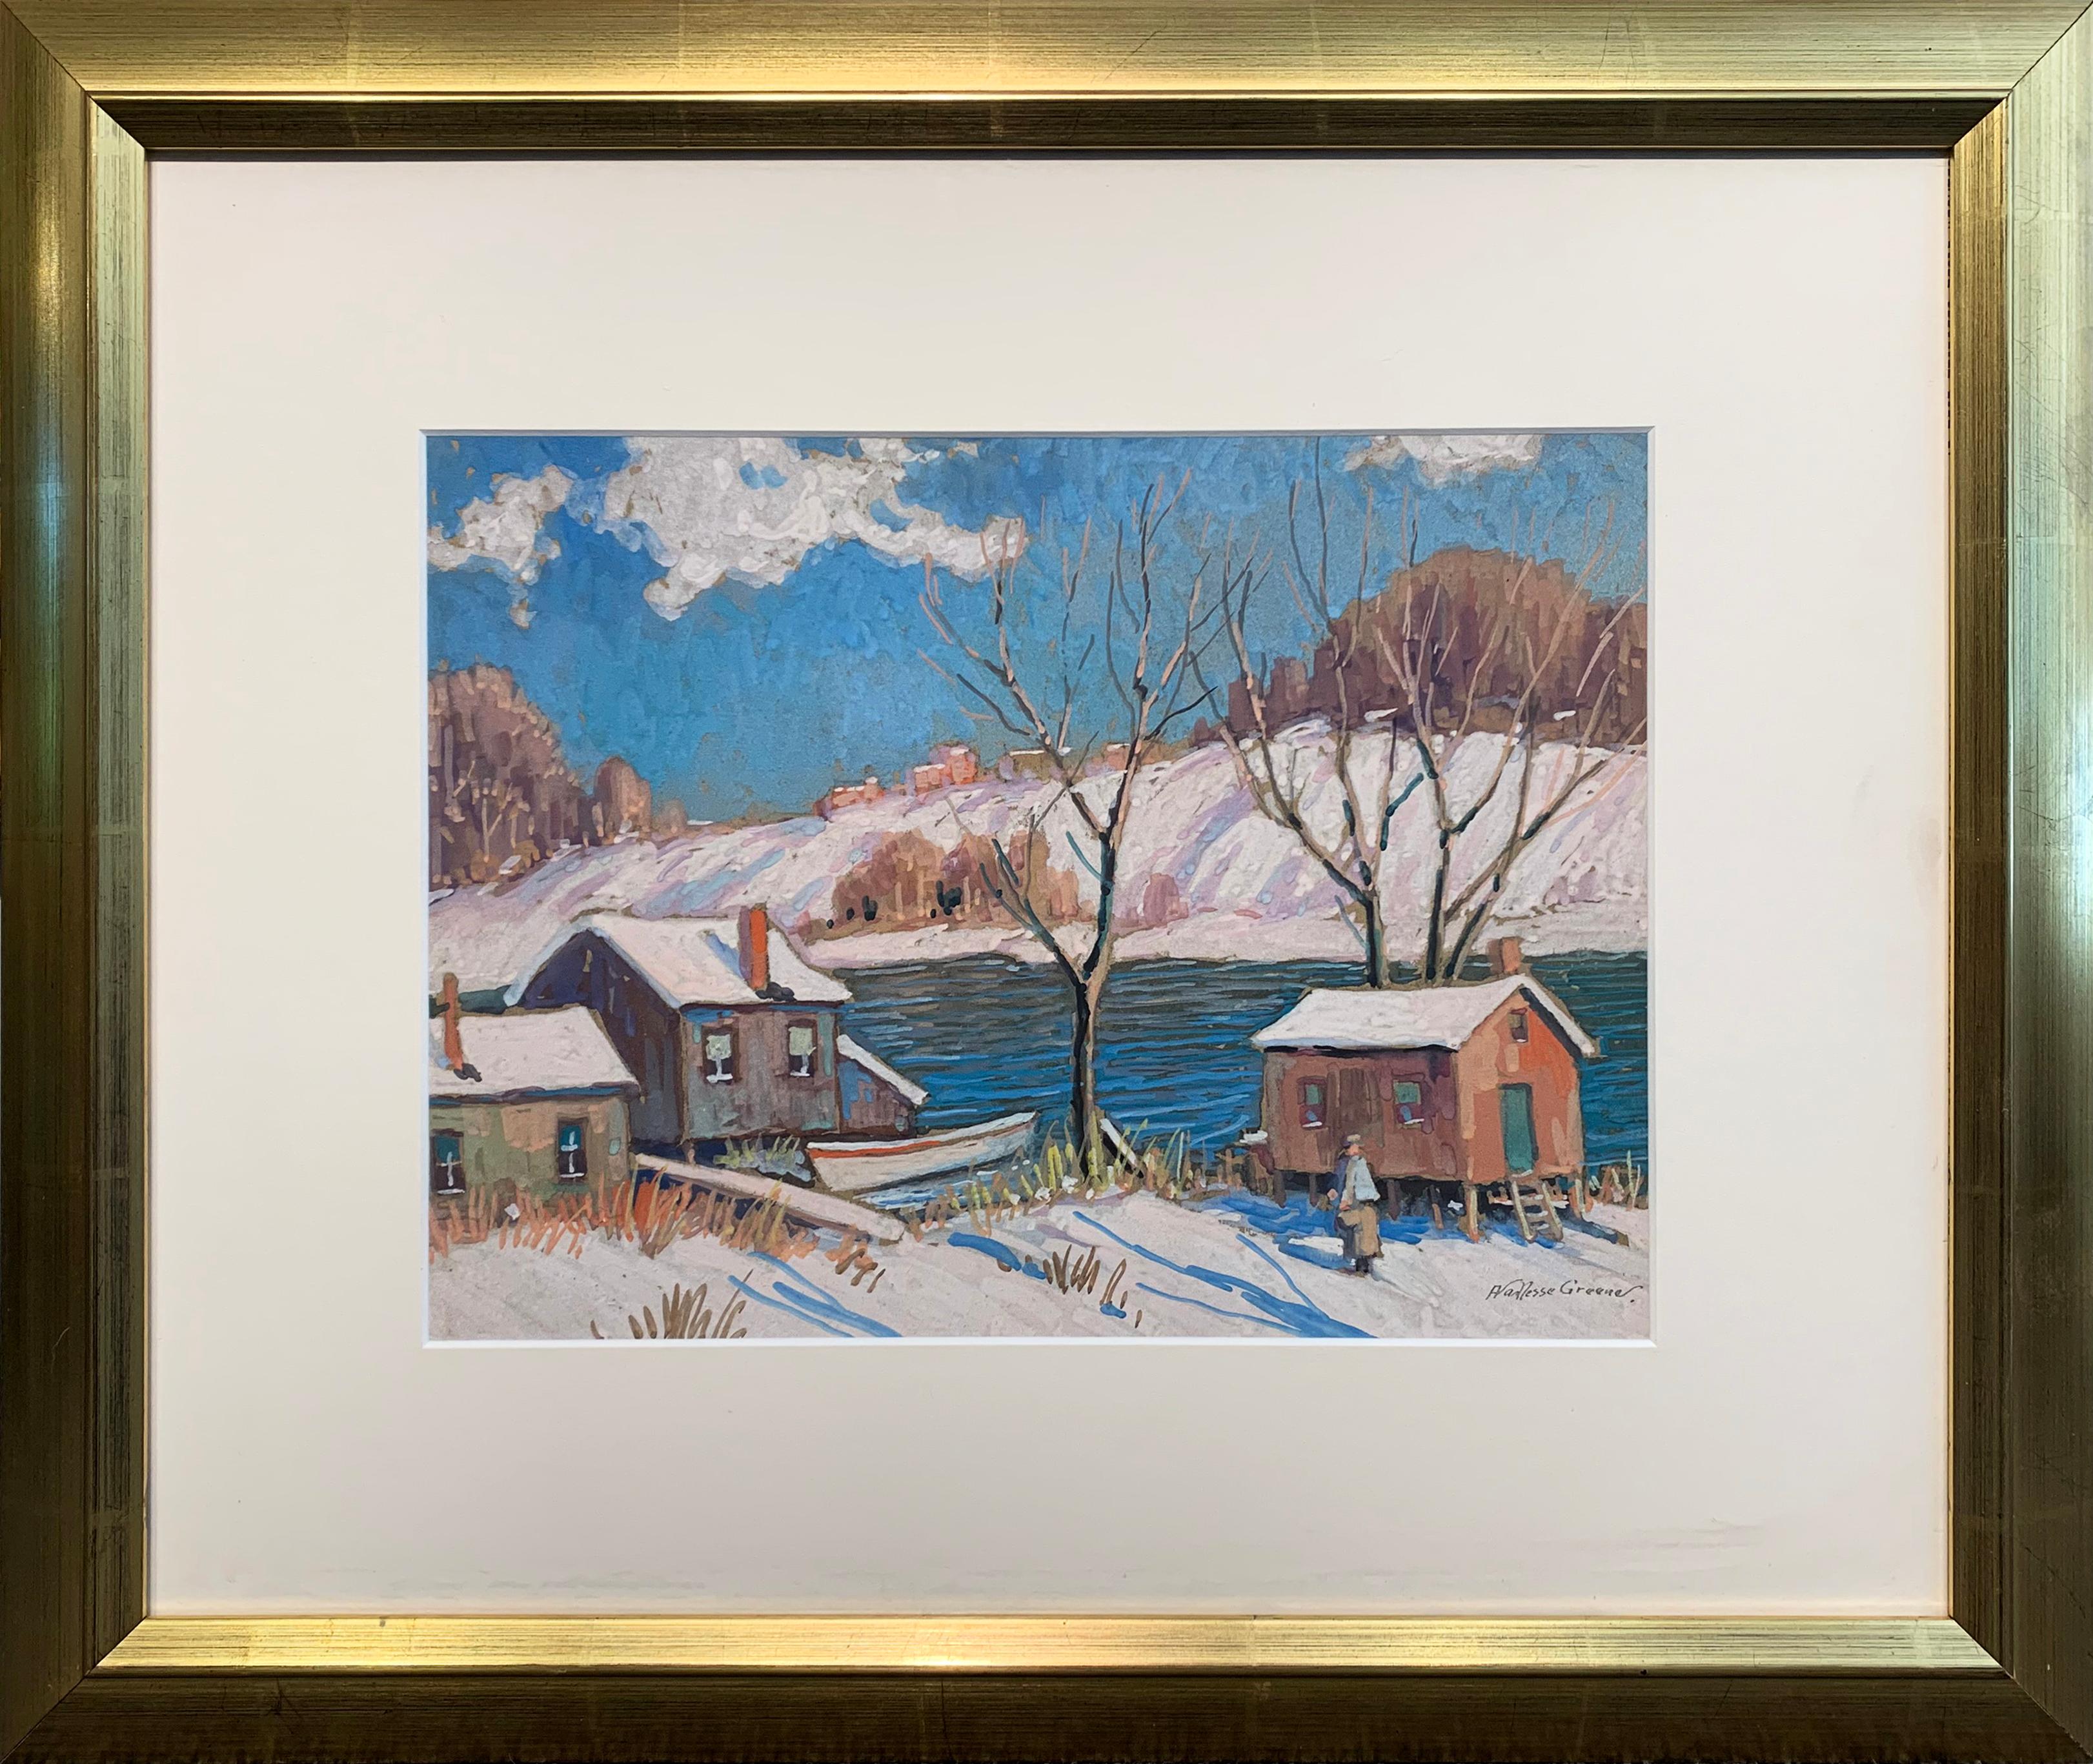 River Cabin, Winter, American Impressionist Snowy Landscape, Signed and Framed